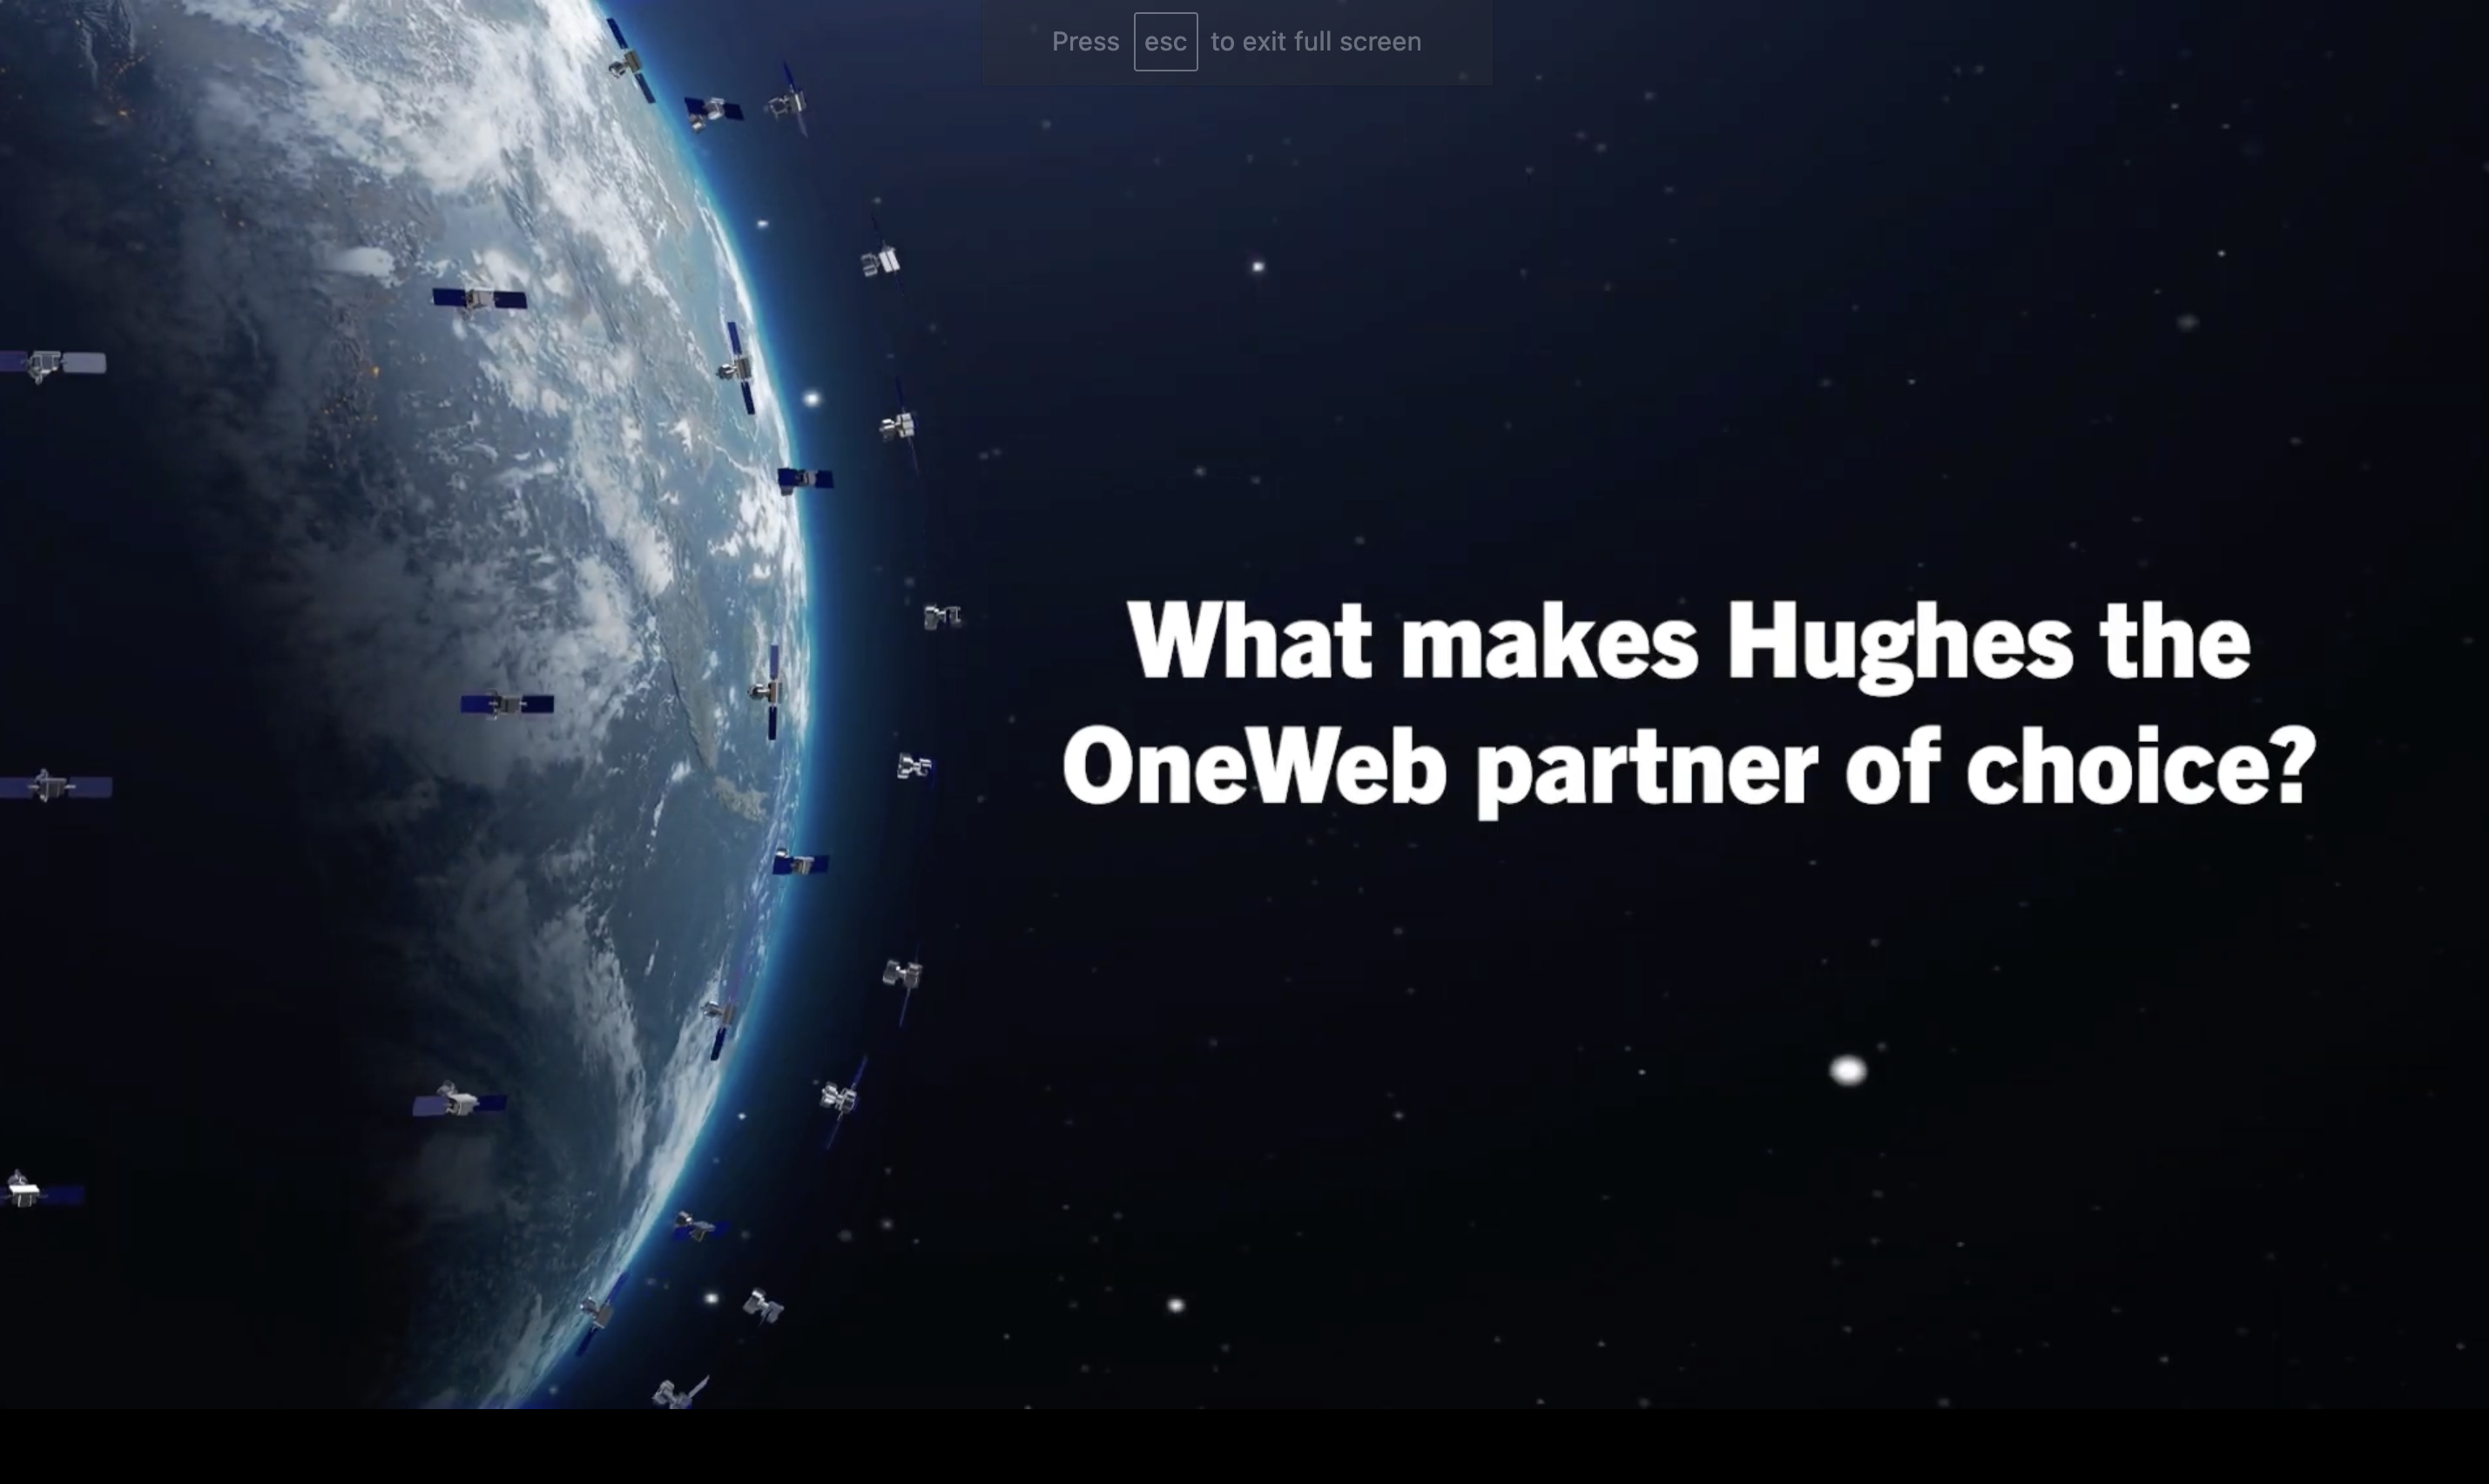 what makes hughes the partner of choice